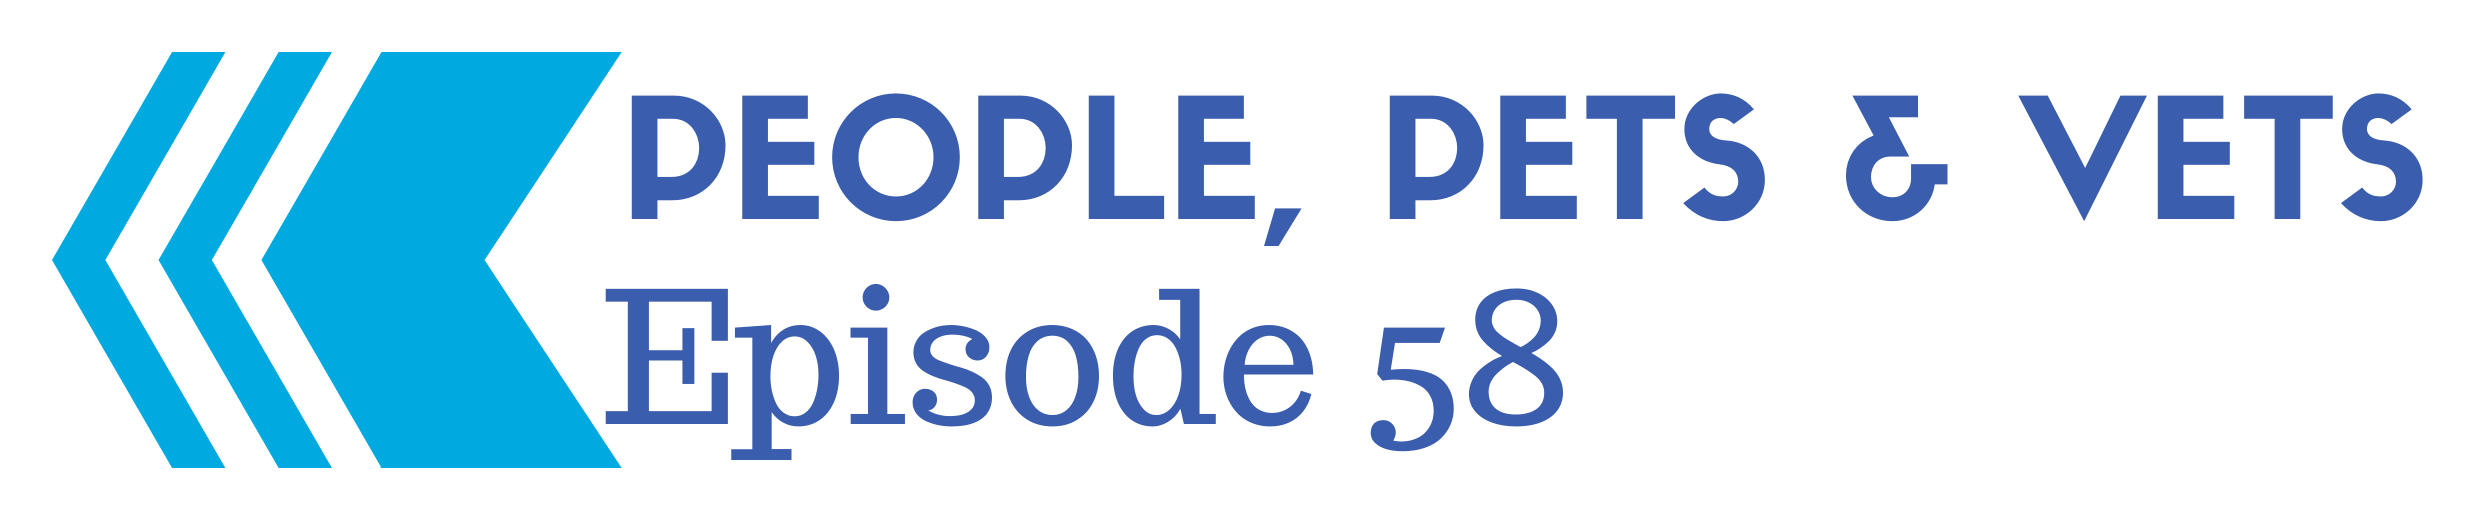 Back to Episode 58